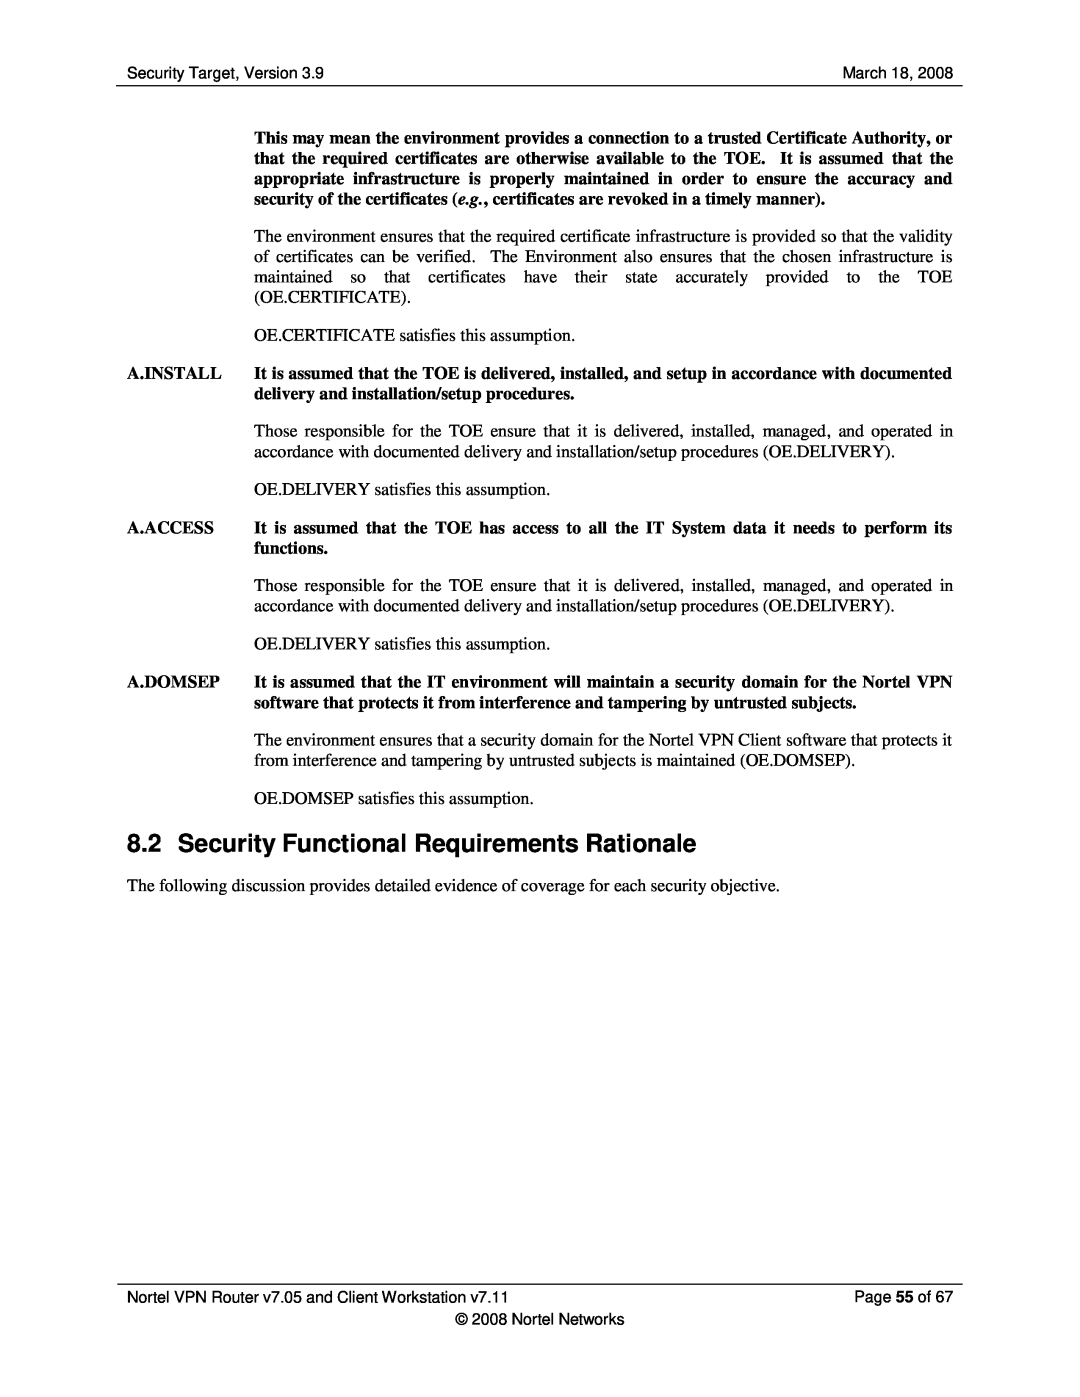 Nortel Networks 7.11, 7.05 manual Security Functional Requirements Rationale, Page 55 of 